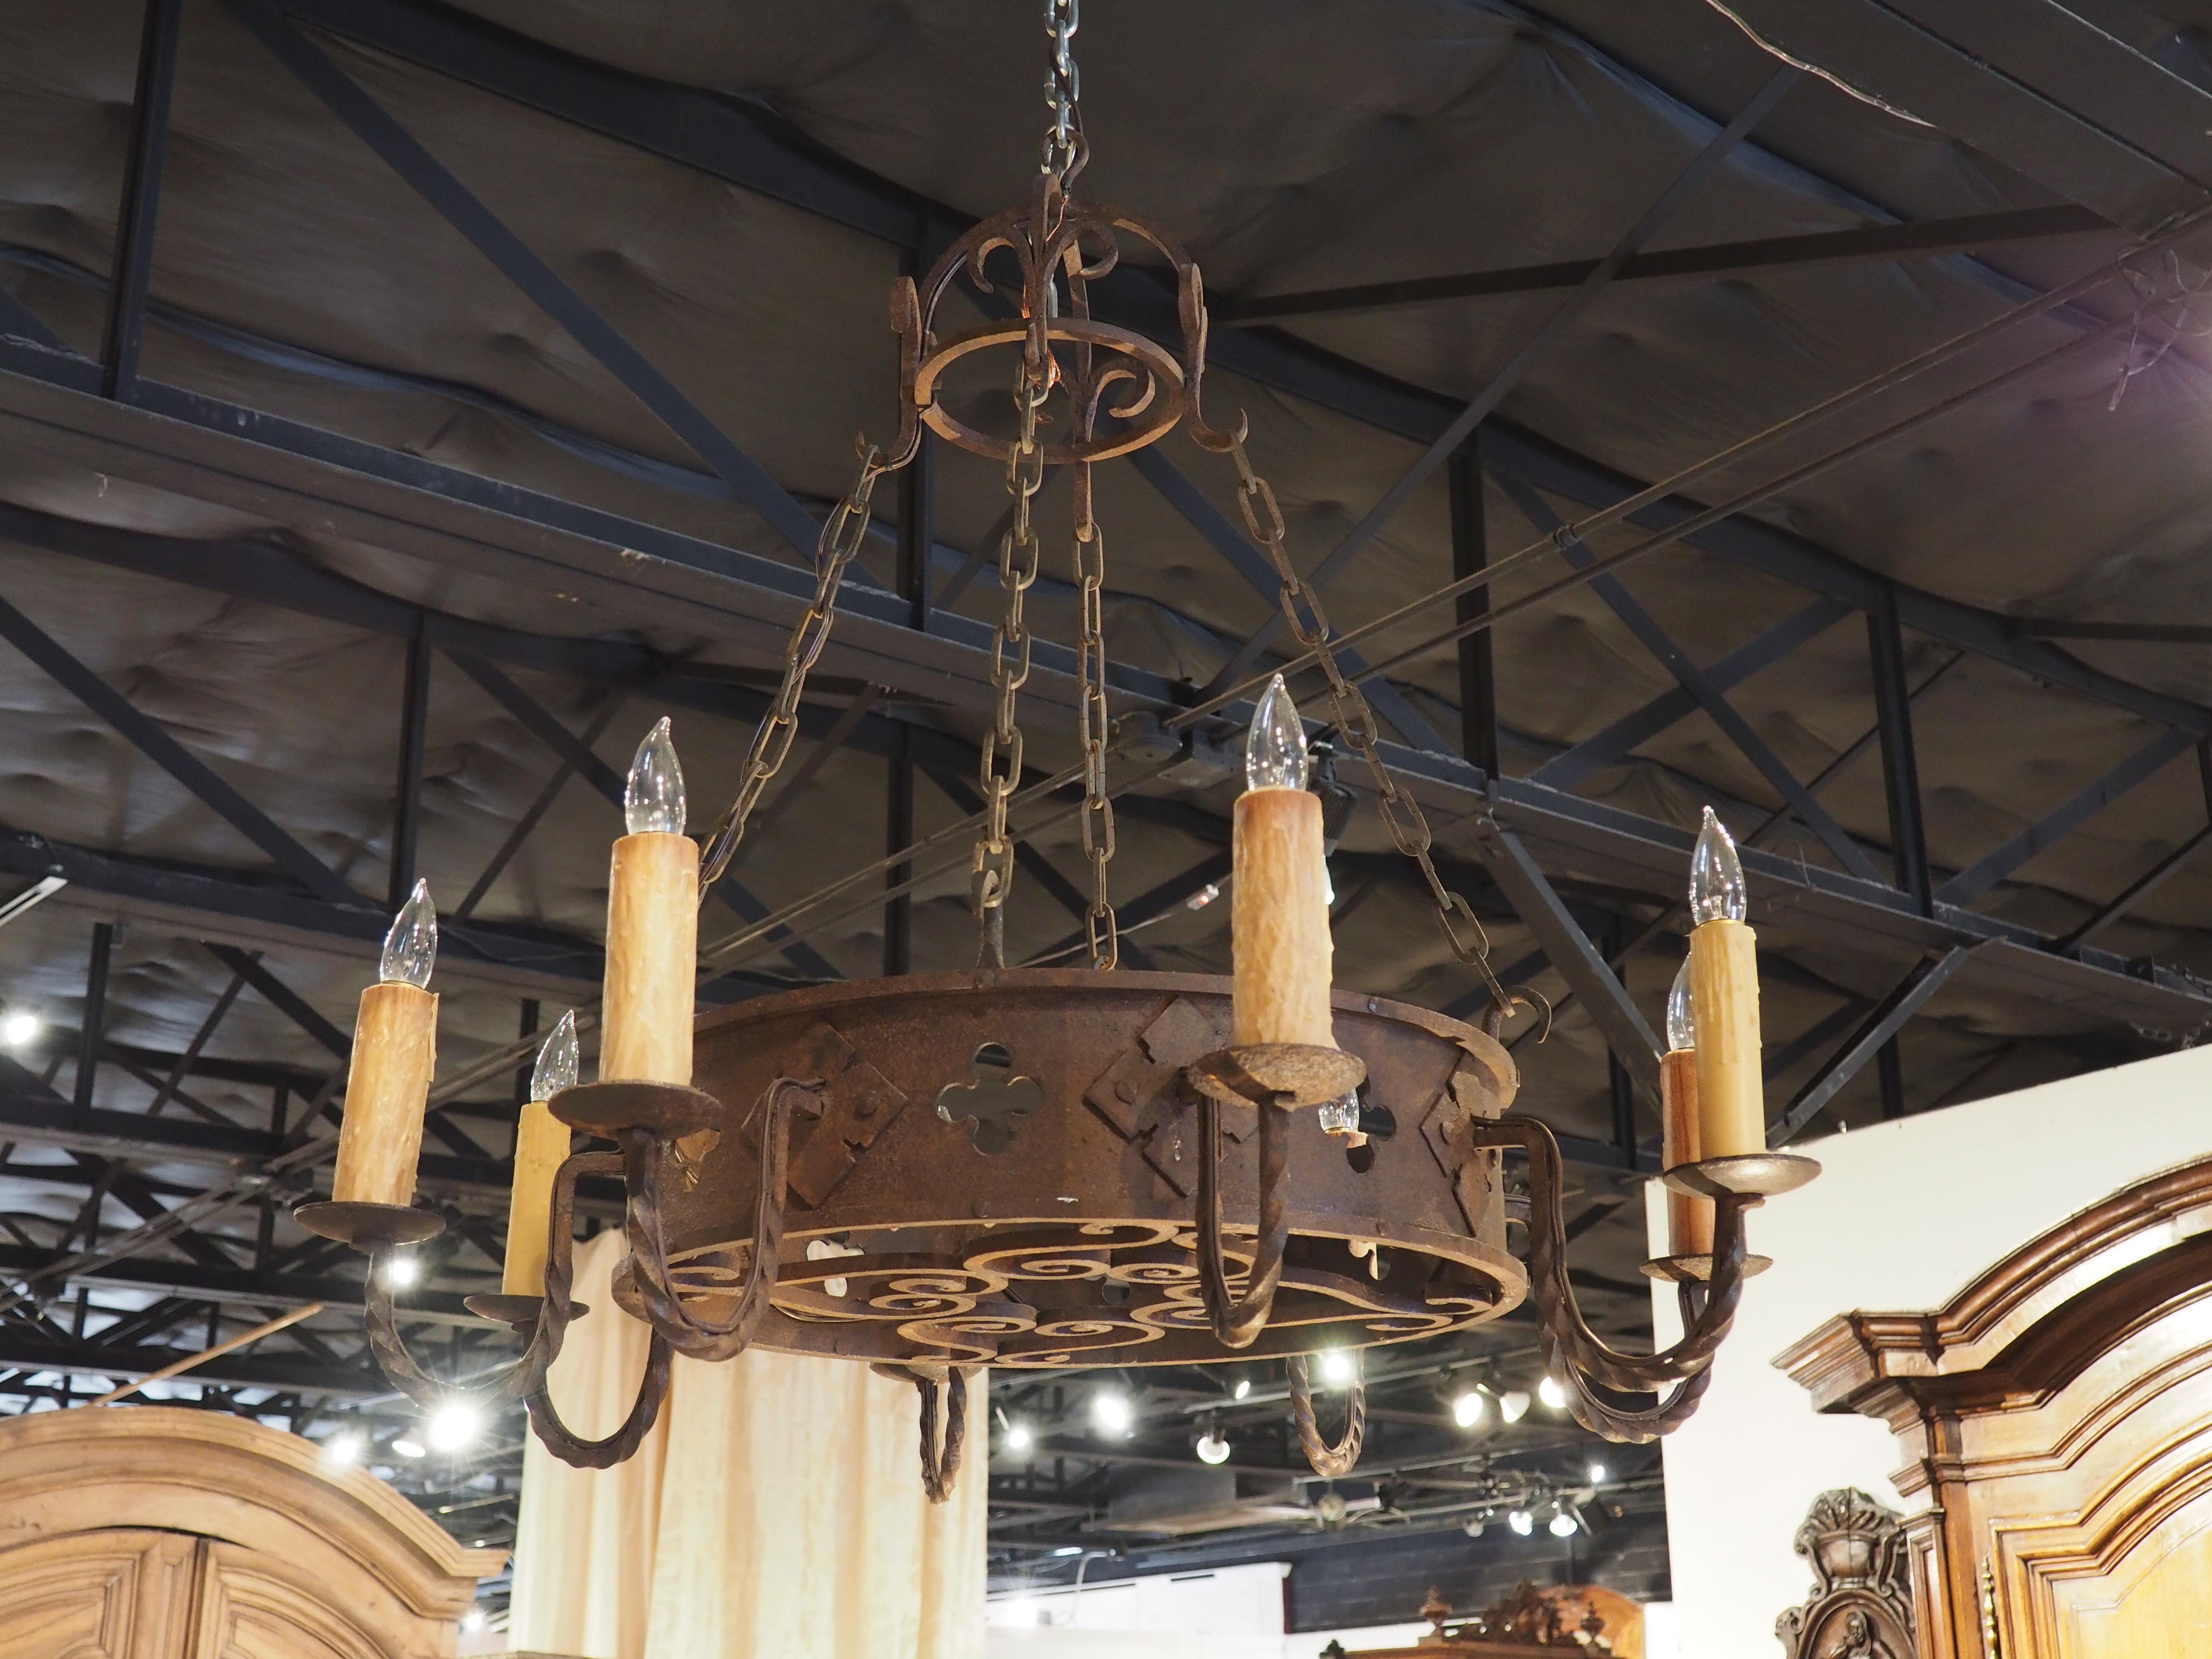 This antique French round iron chandelier has a tall metal band of rusted iron with eight candlelight arms around the outside. The arms are scooped with a twisted motif and have a back plate of a four sided floret. In between the arms on the band